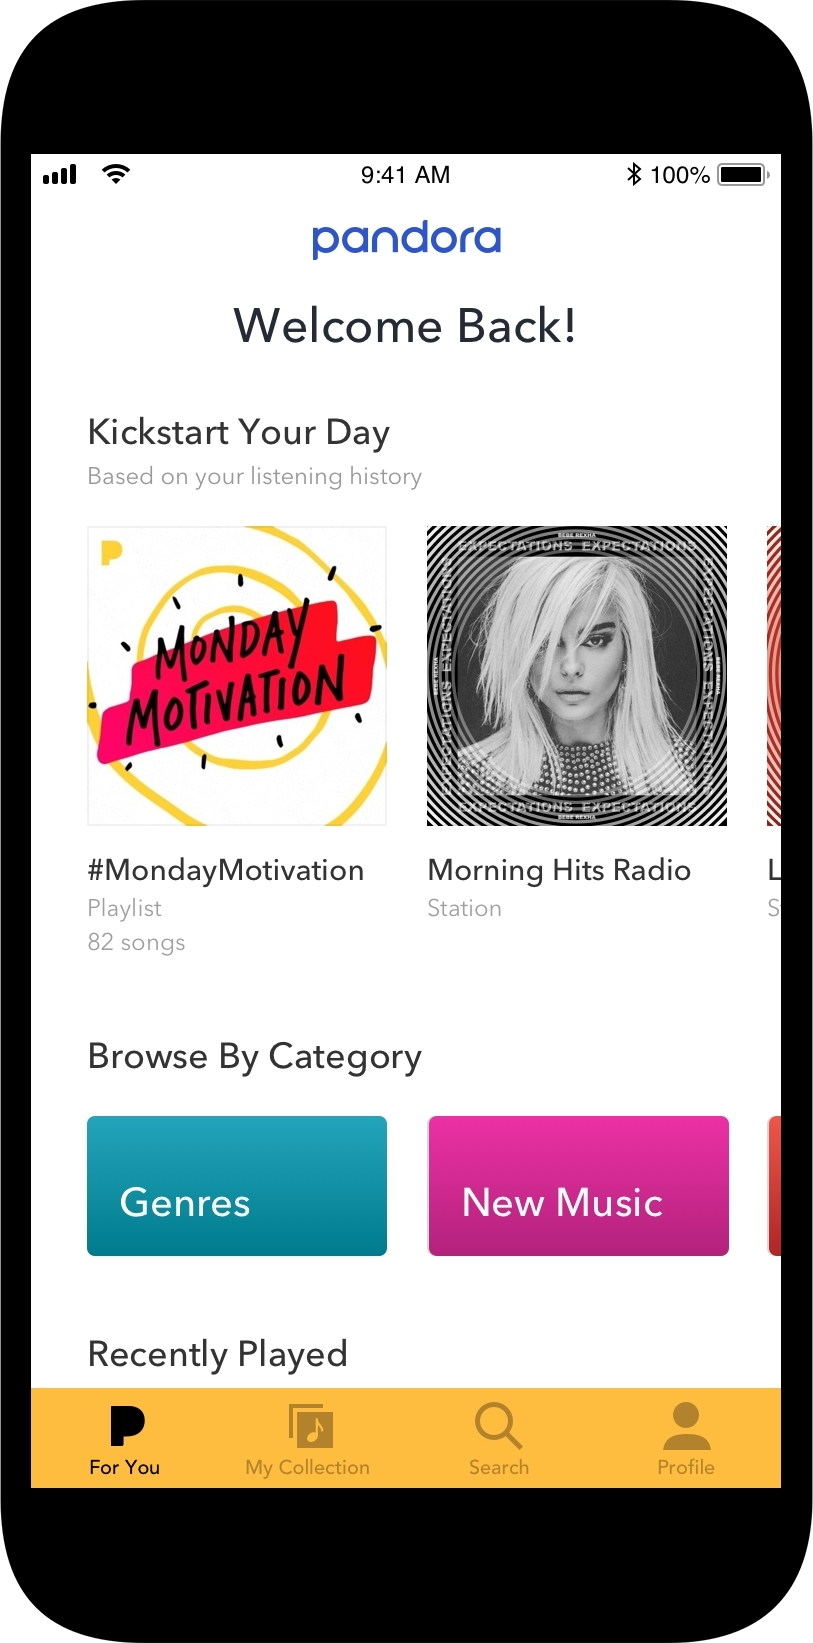 Can You Make Playlists On Pandora New Pandora Mobile Experience Adds Dynamic Personalization And Discovery Features To Unlock A New World Of Music Podcasts And Unique Content Business Wire